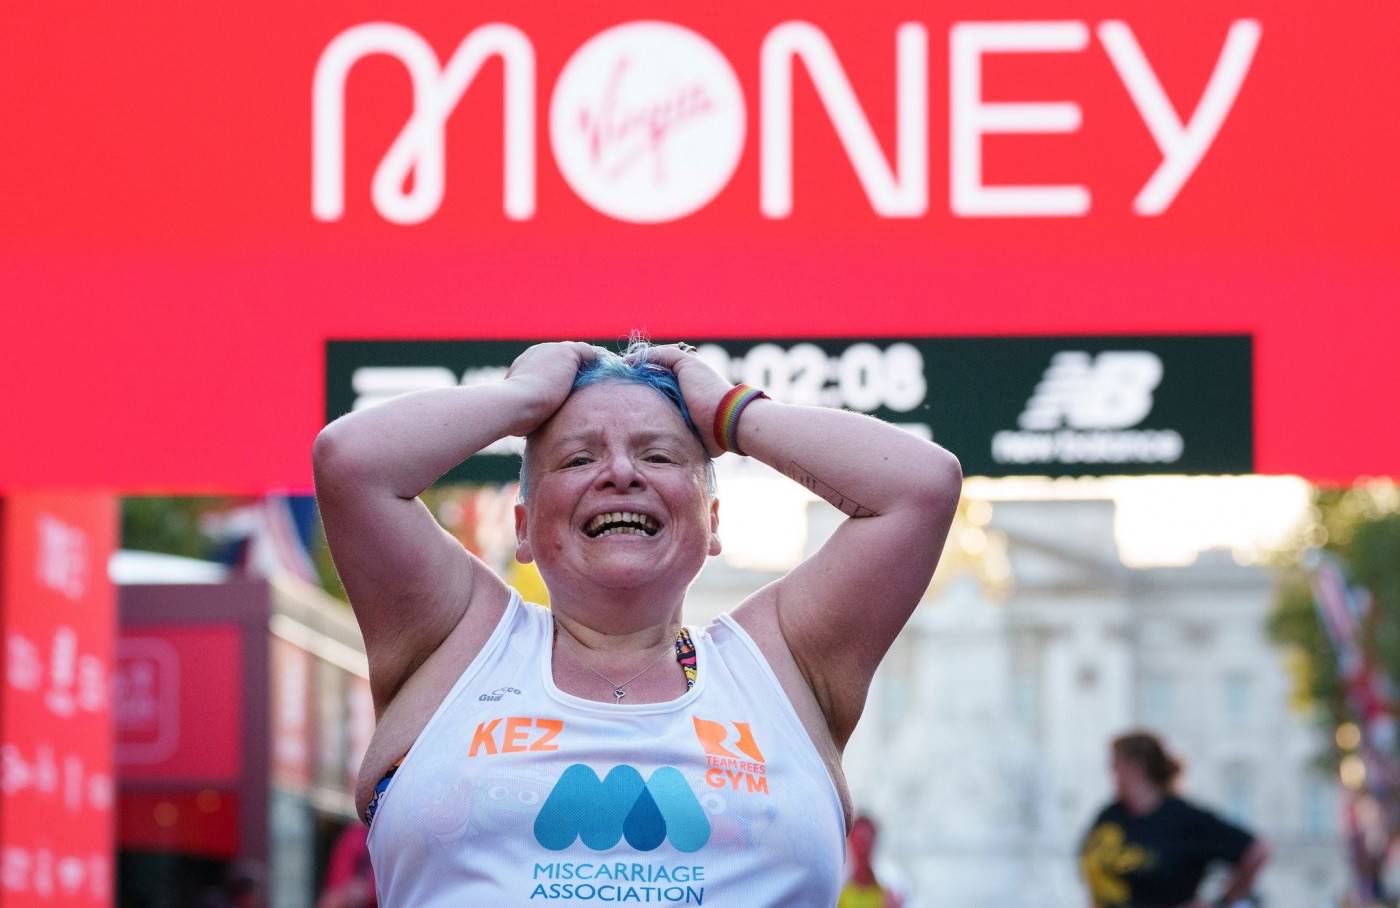 Kerri Aldridge completing the London Marathon. She looks exhausted and elated underneath a finishing banner.